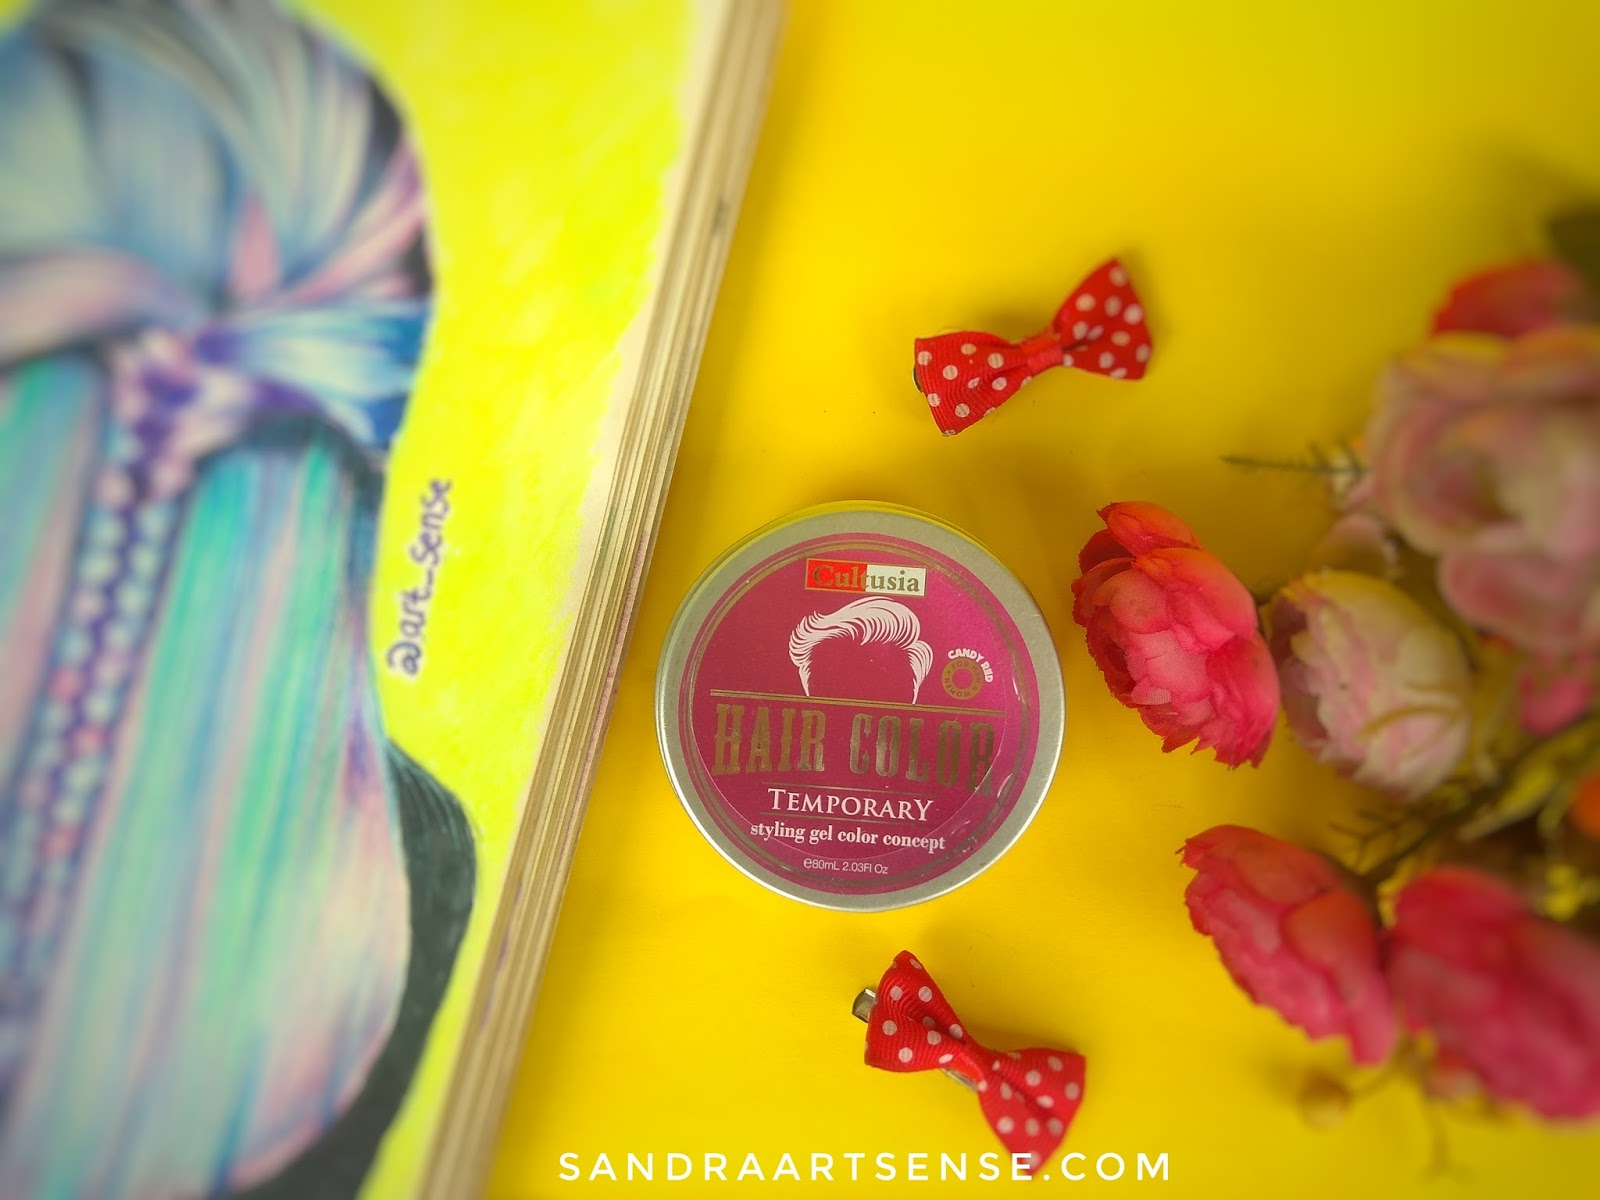 Sandraartsense.com: [REVIEW] Cultusia Candy Red Hair Color 